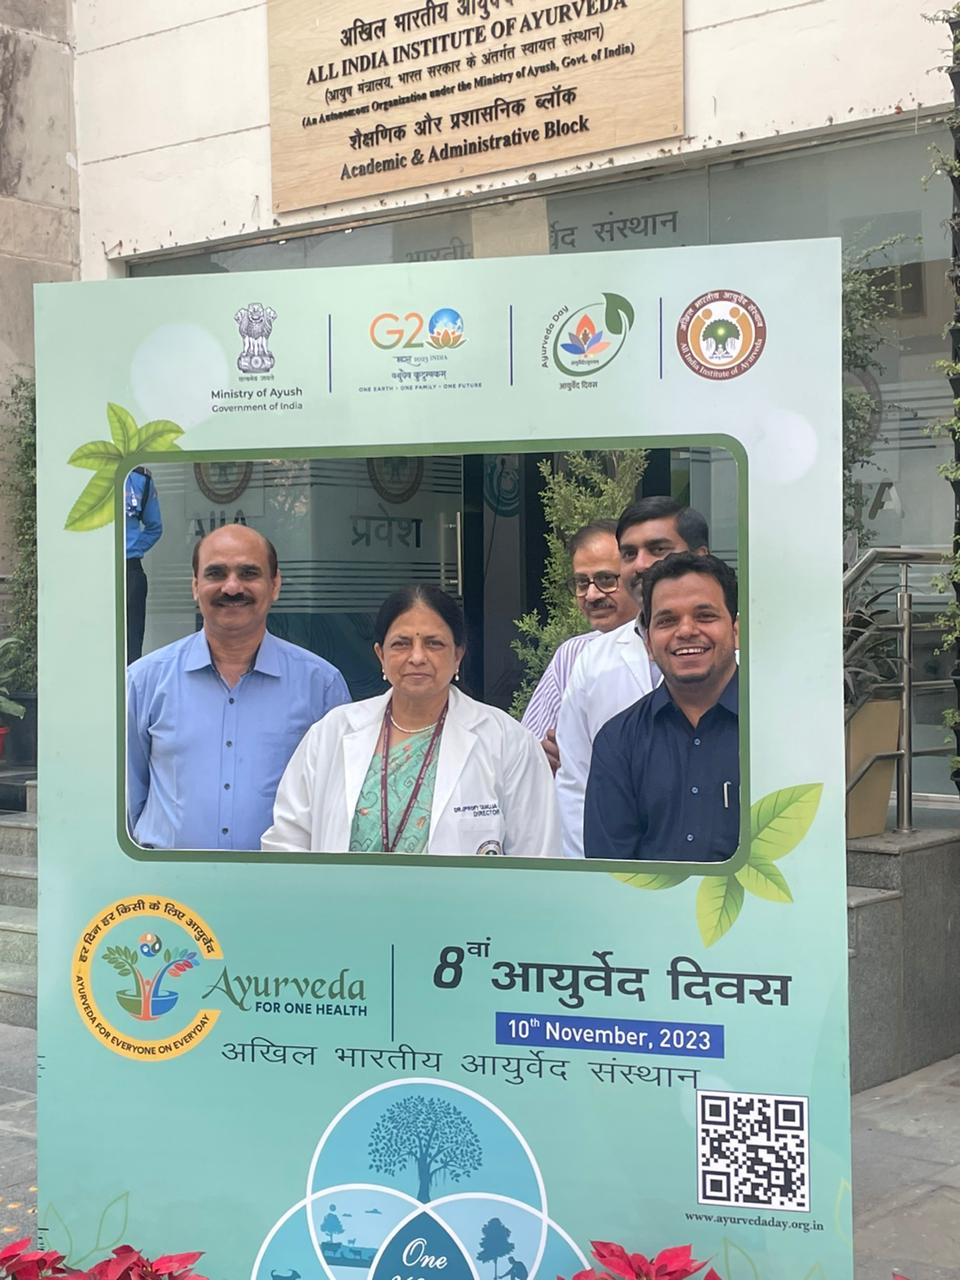 Prof. (Dr) Tanuja Nesari, Director AIIA New Delhi gave message of Ayurveda for One Health from Selfie Point